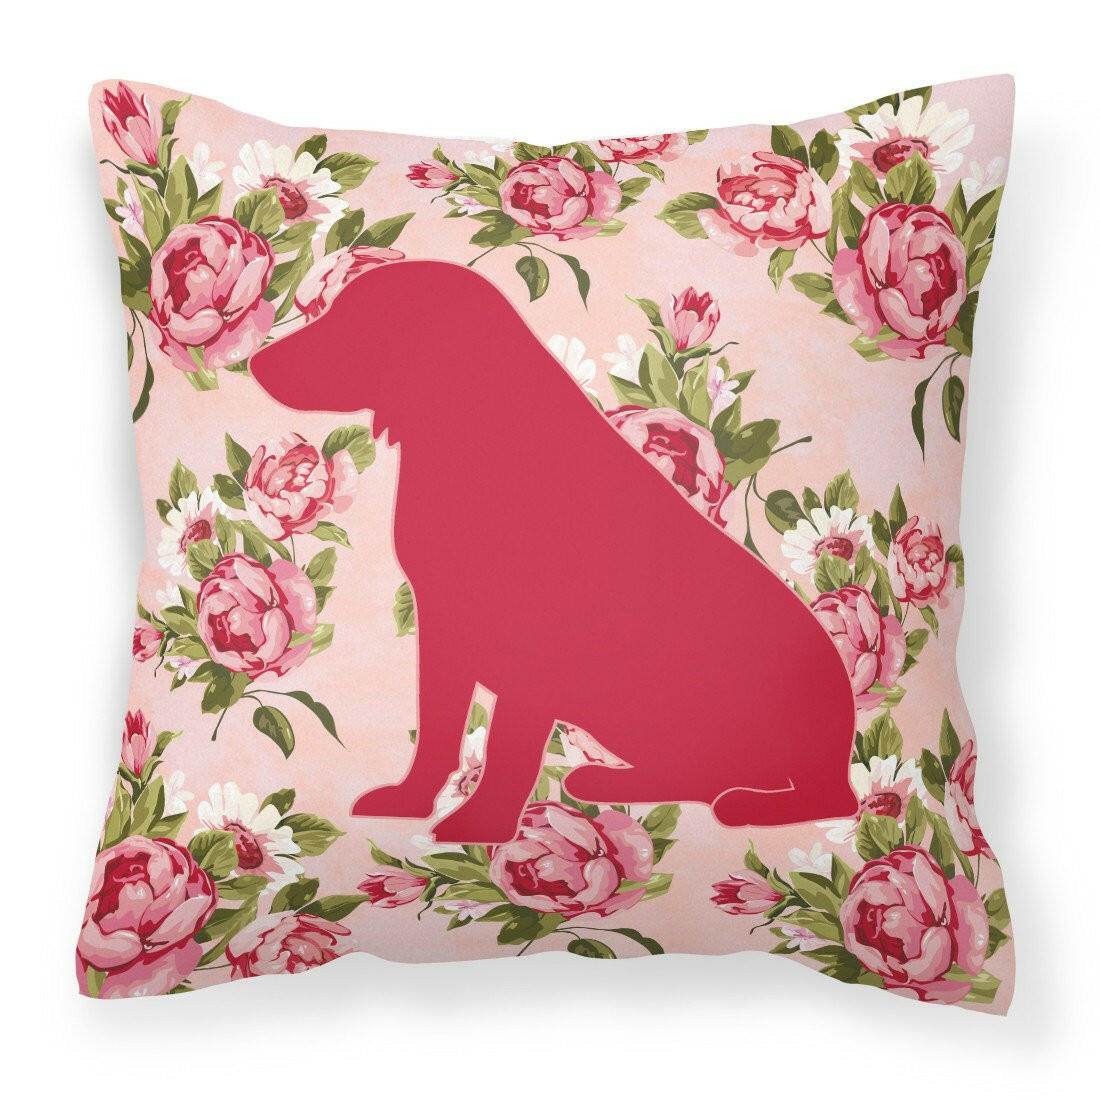 Boykin Spaniel Shabby Chic Pink Roses  Fabric Decorative Pillow BB1070-RS-PK-PW1414 - the-store.com